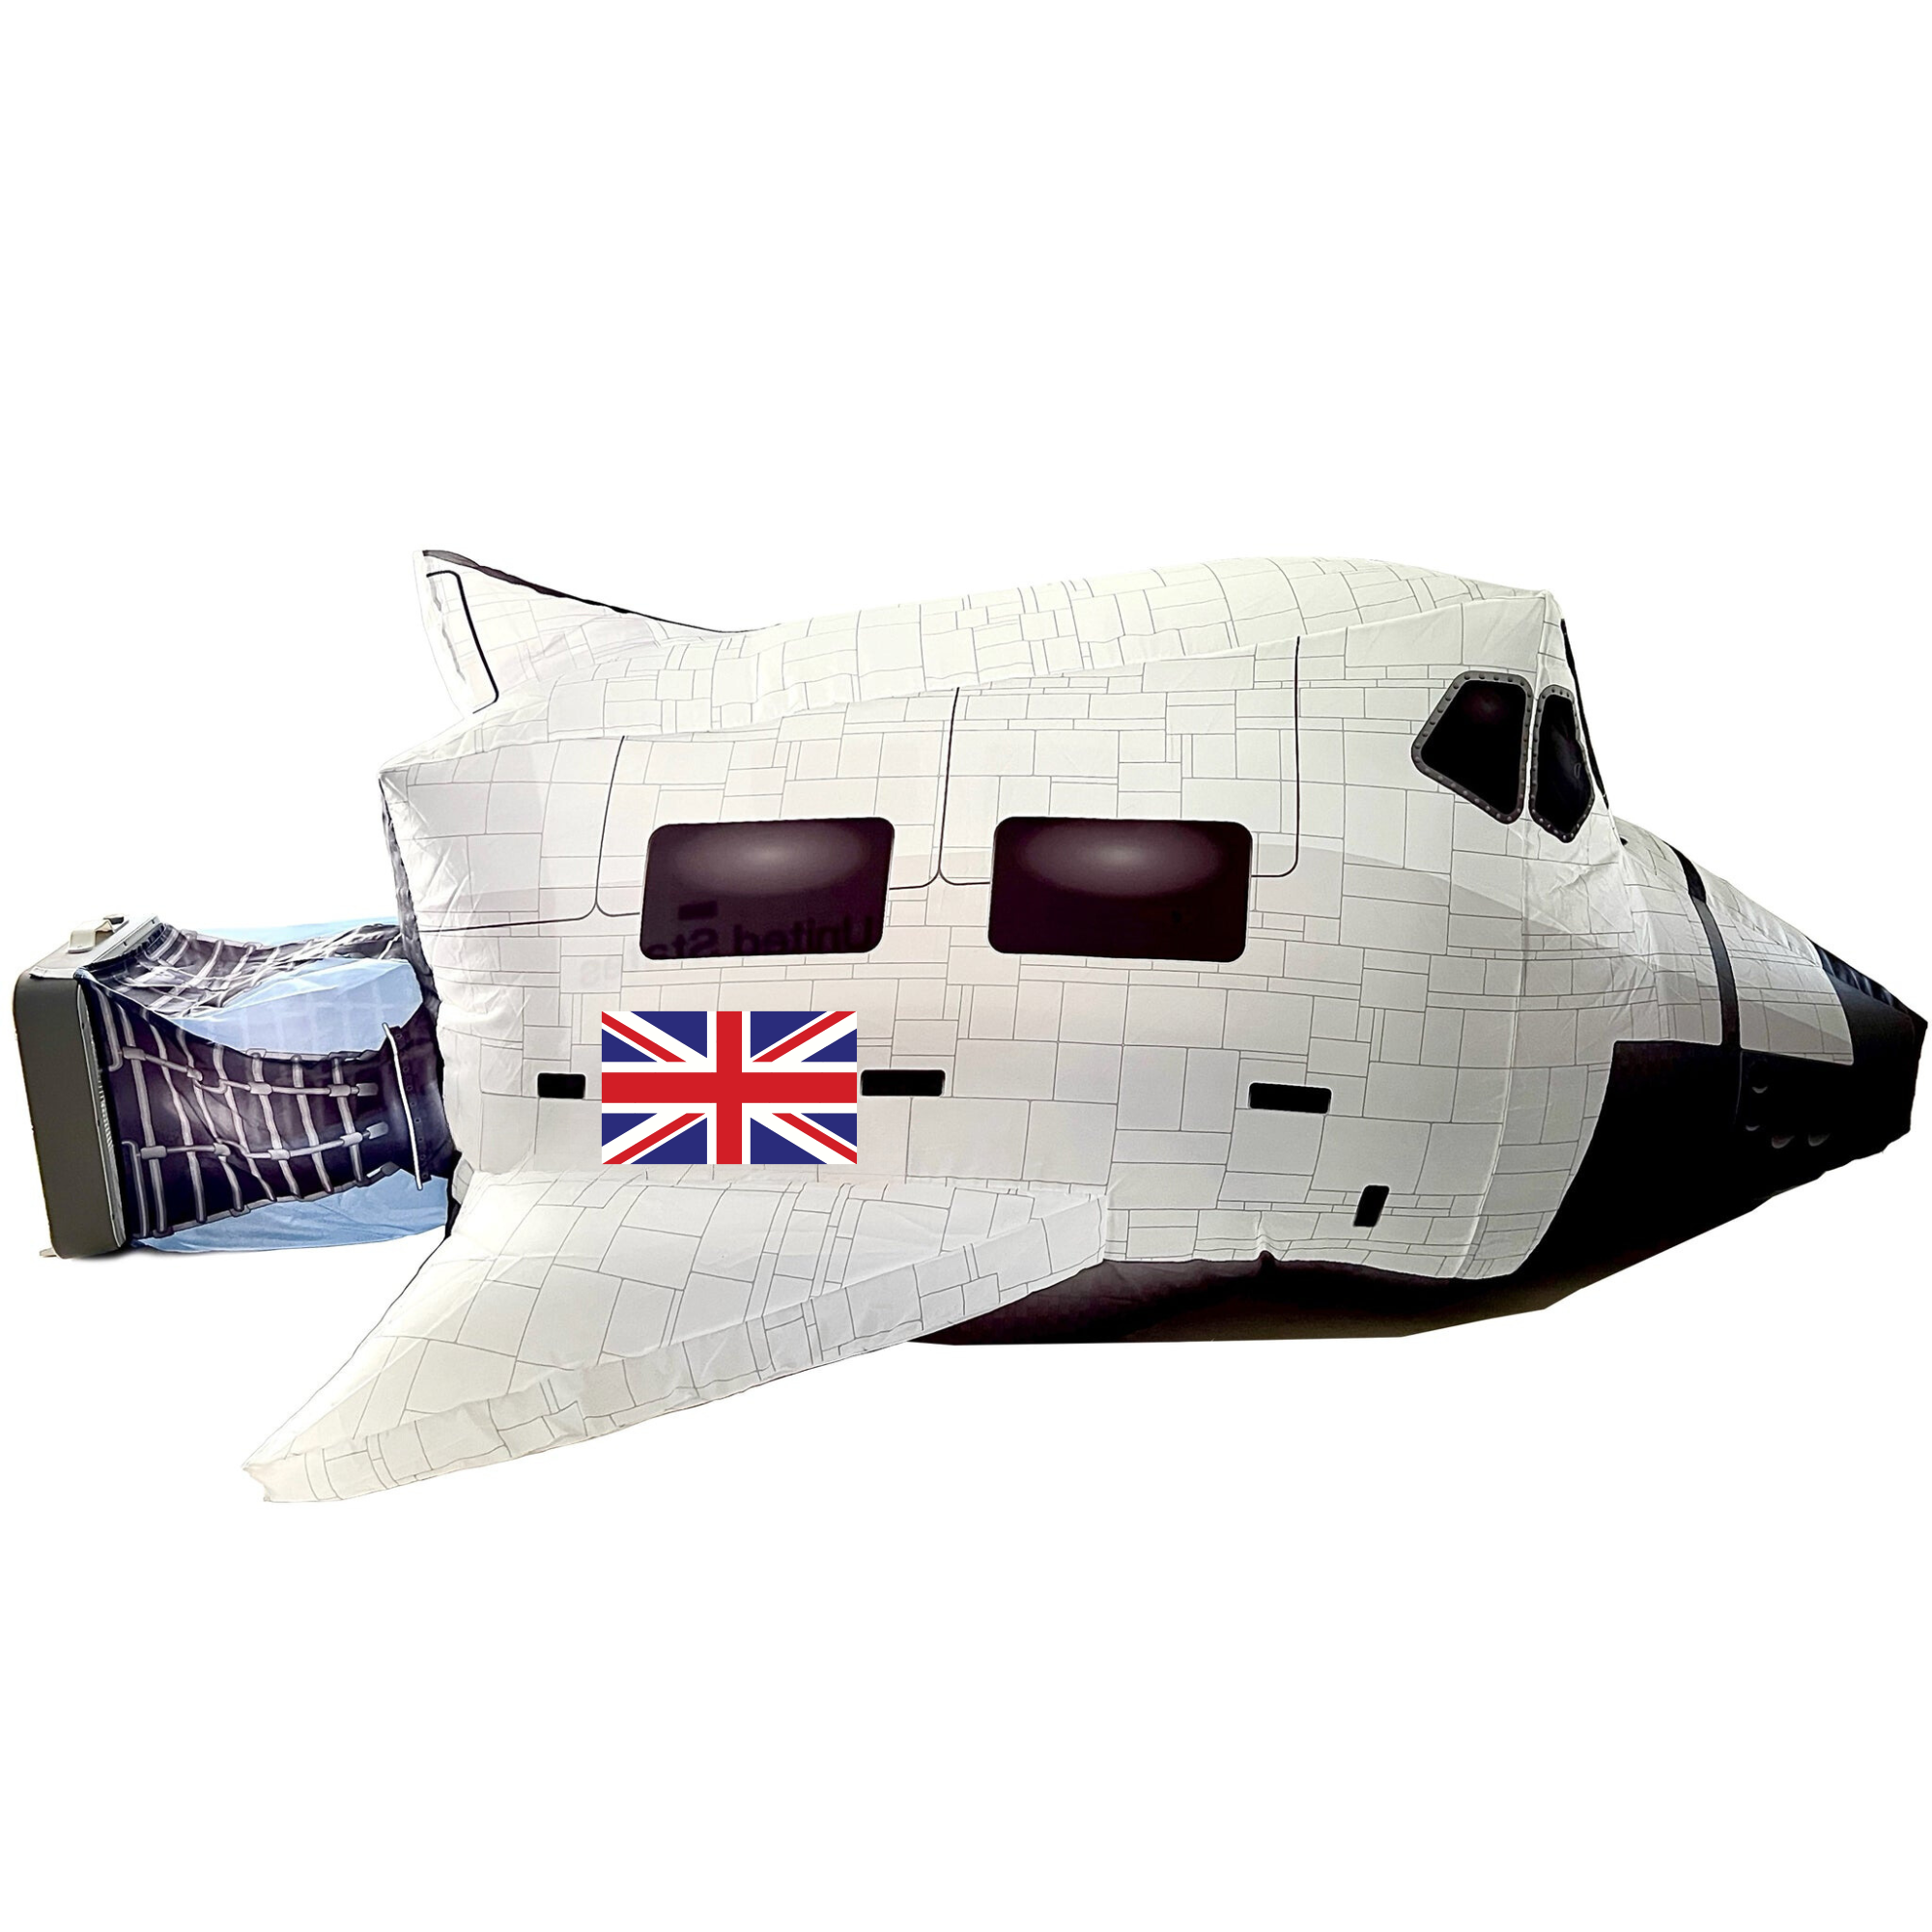 The Original AirFort - Space Shuttle